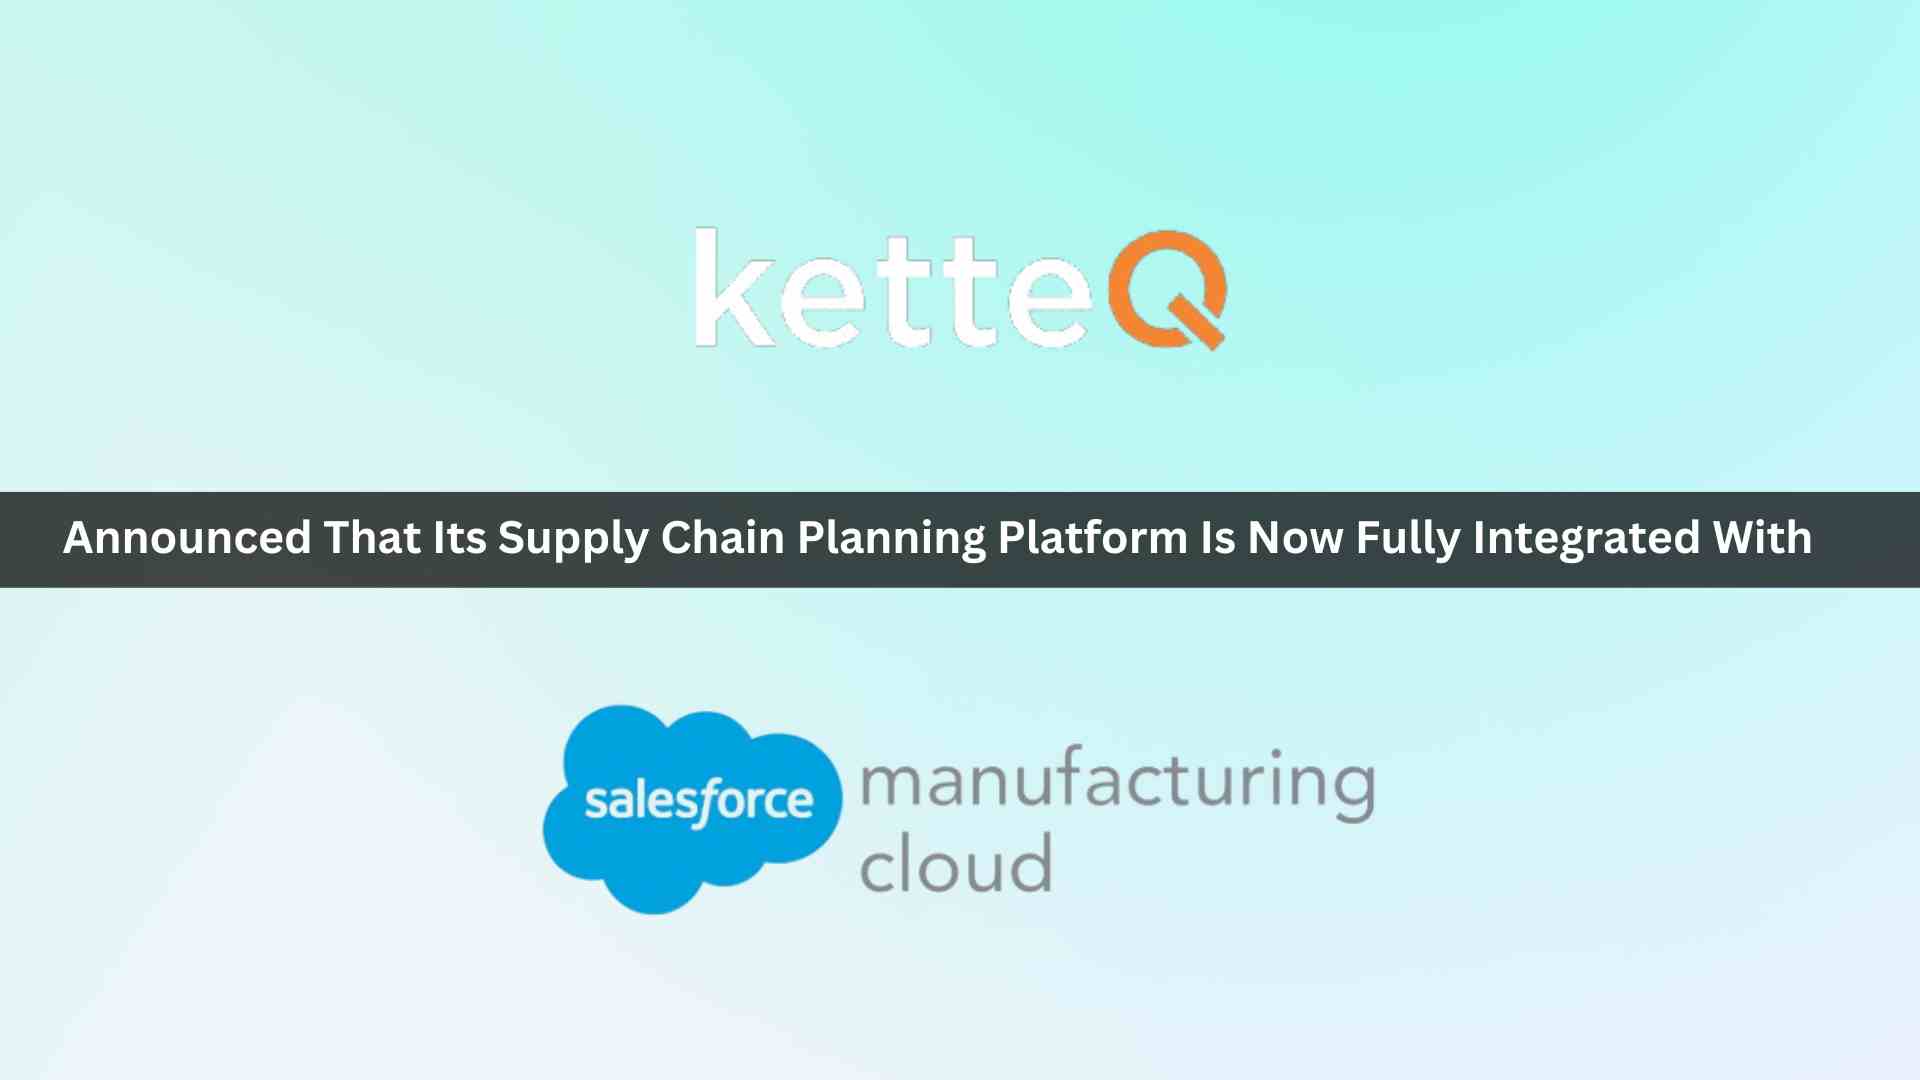 ketteQ and Salesforce Manufacturing Cloud Come Together to Deliver Complete Supply Chain Planning Solution for Manufacturers